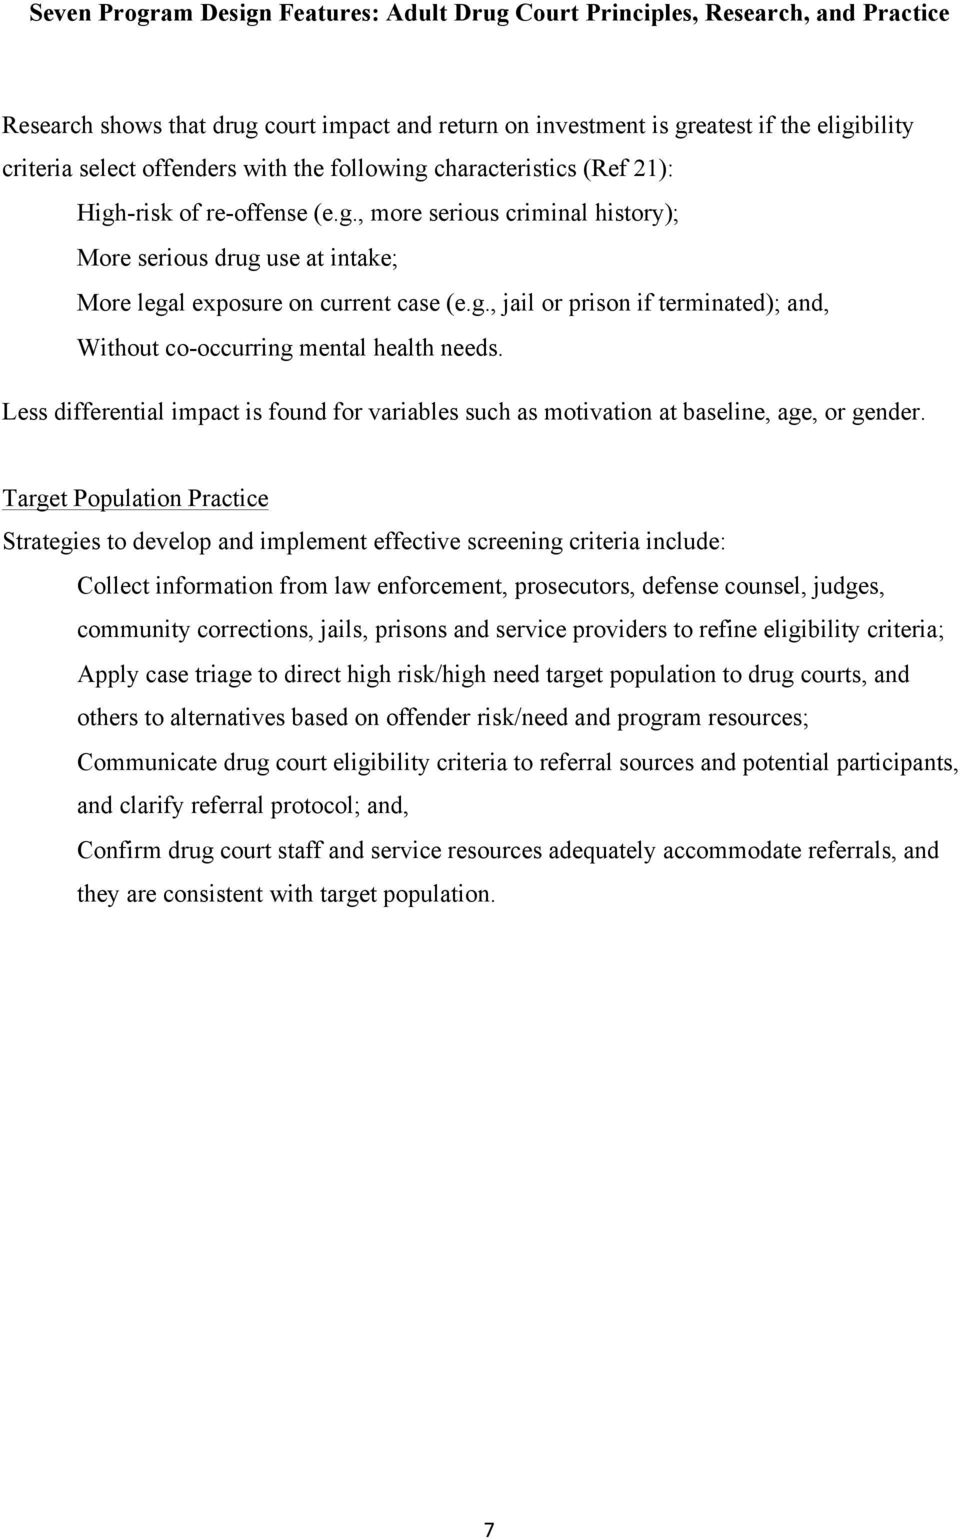 Target Population Practice Strategies to develop and implement effective screening criteria include: Collect information from law enforcement, prosecutors, defense counsel, judges, community